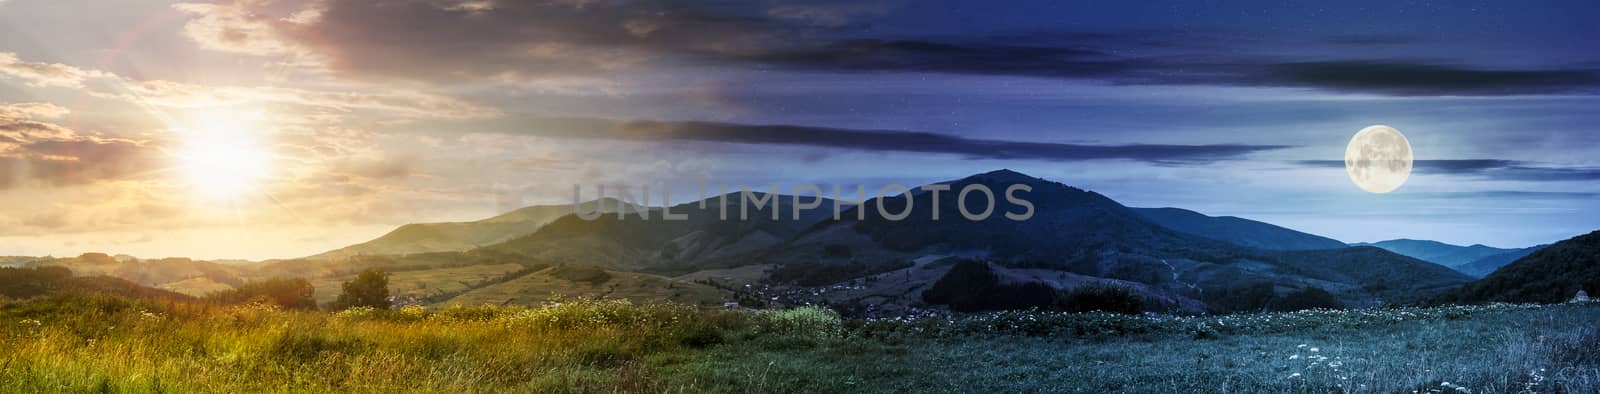 Day and night concept of summer landscape panoramic image of rural fields in mountains under cloudy sky